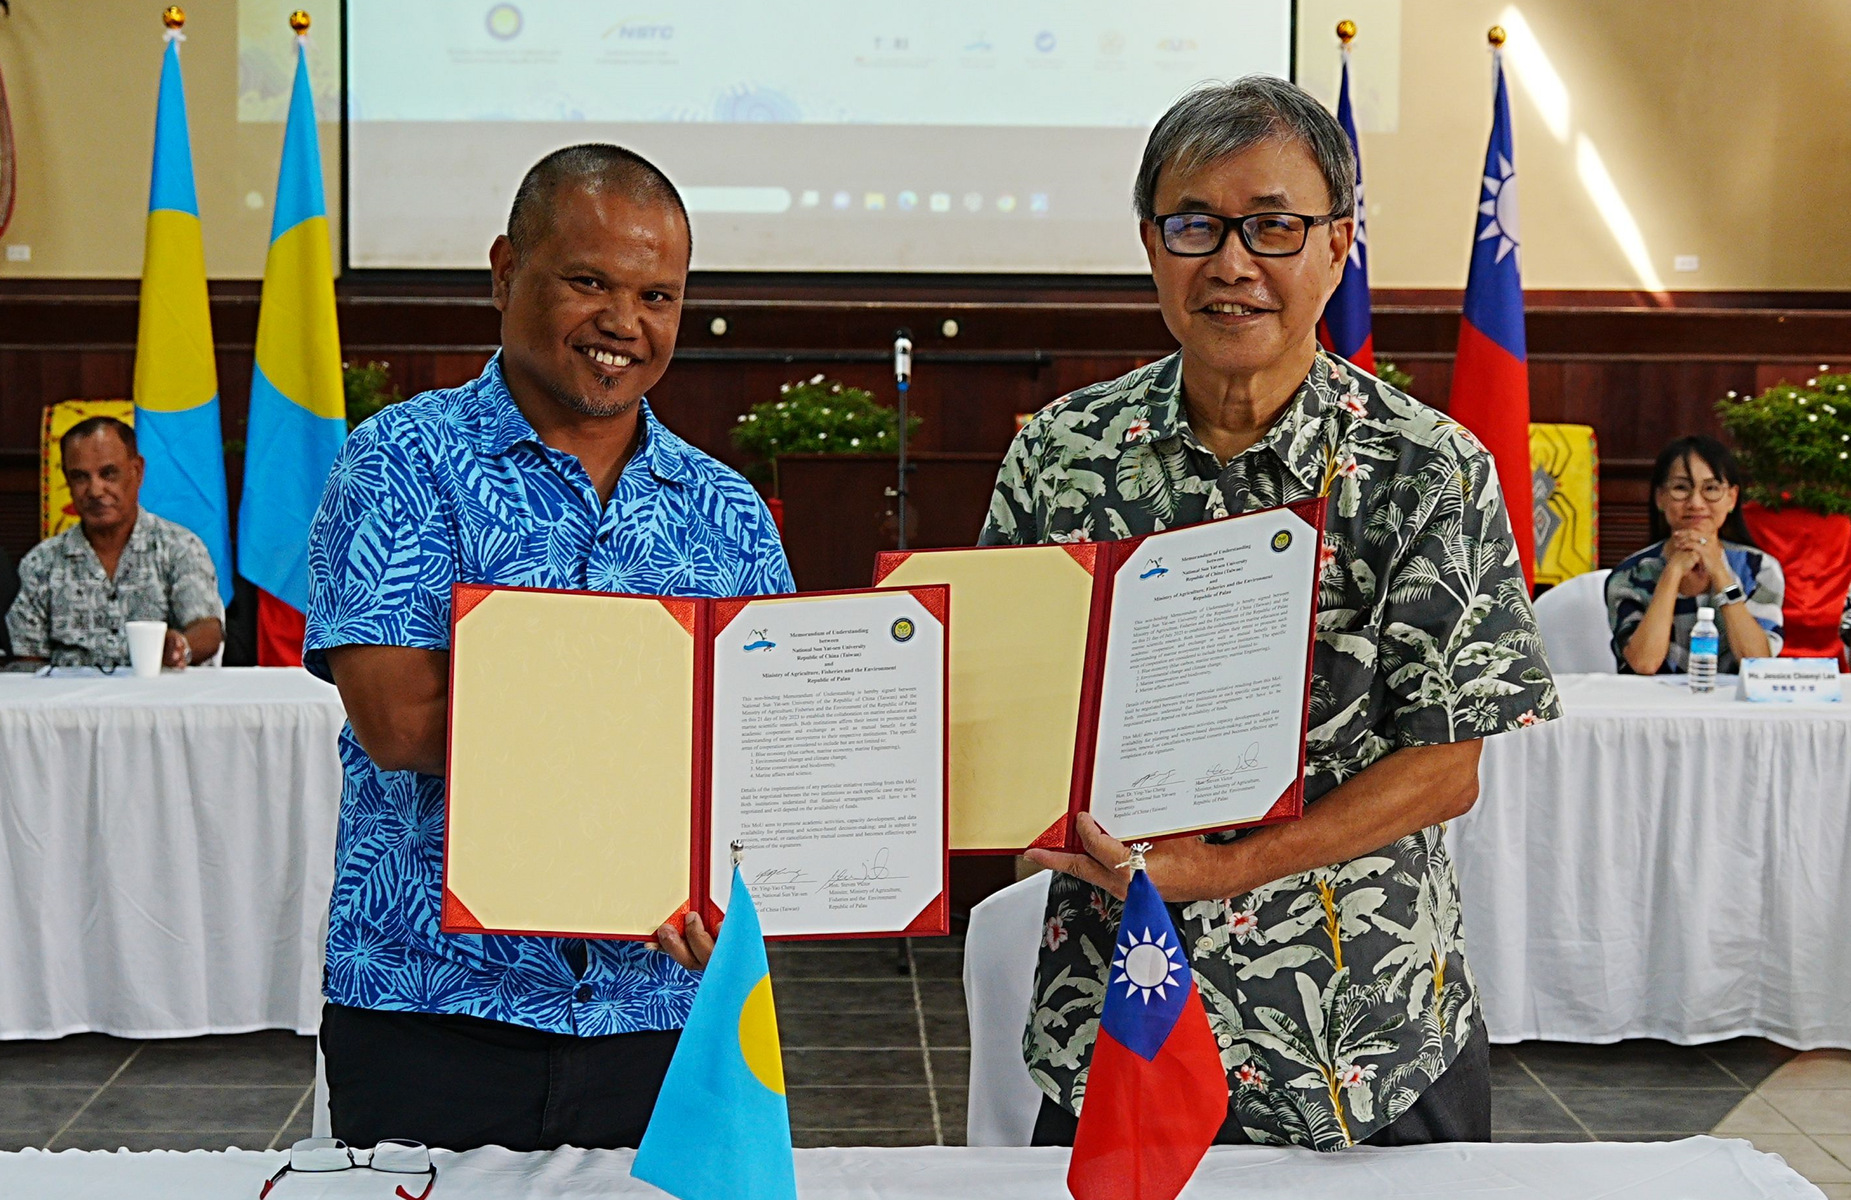 Ying-Yao Cheng, the President of NSYSU (right in the photo), and Steven Victor, Minister of Agriculture, Fisheries, and the Environment of Palau, signed the MOU